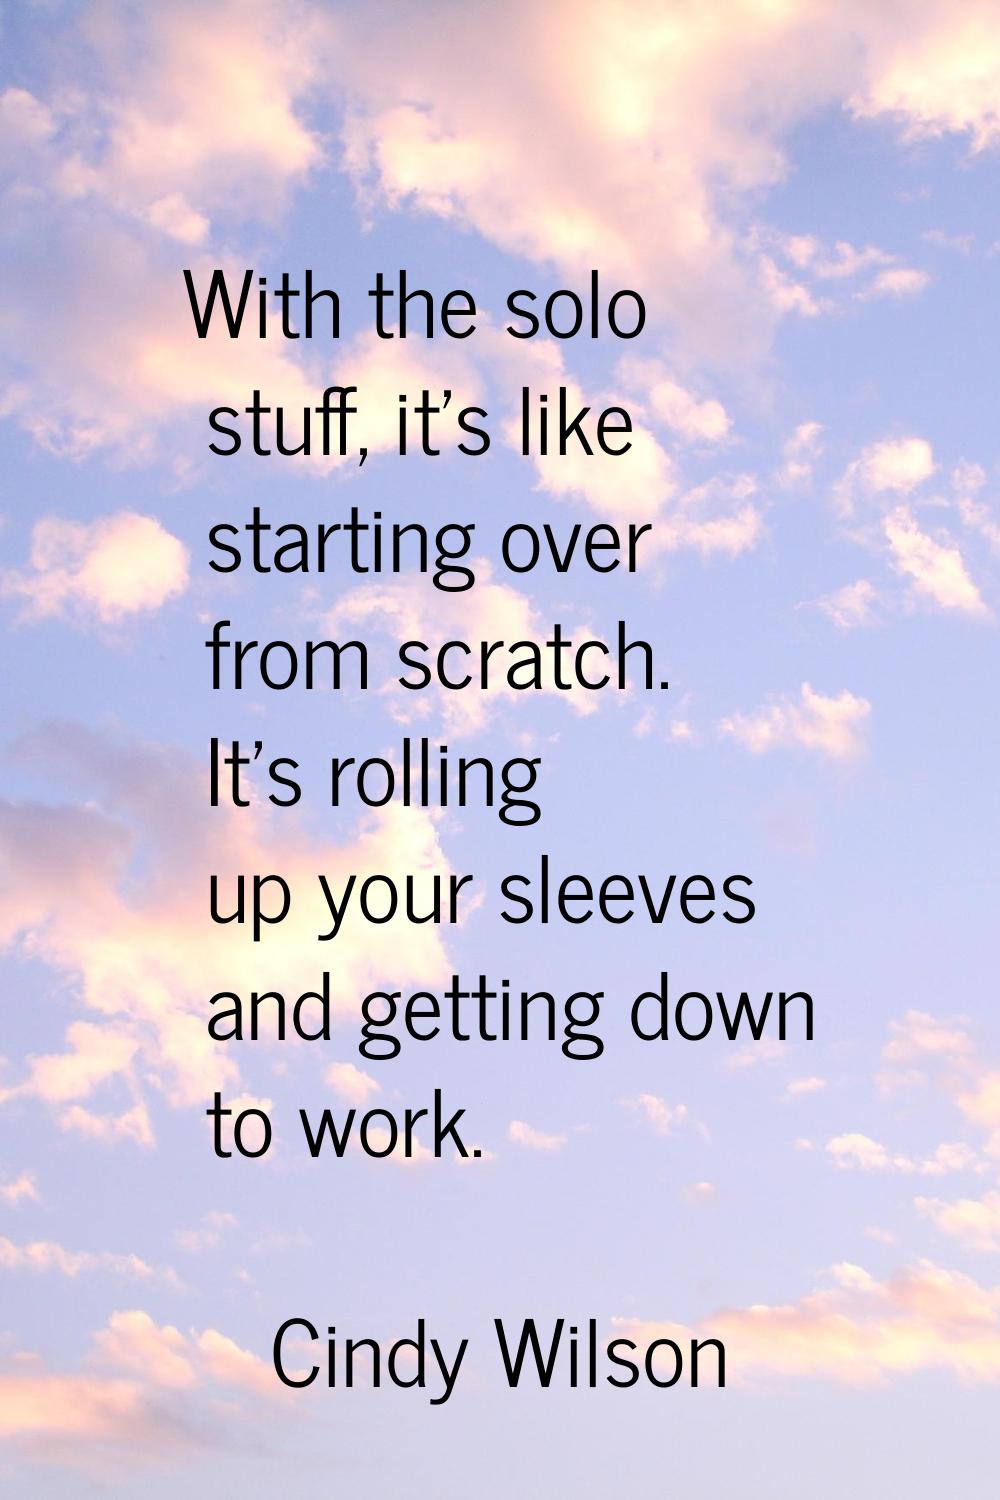 With the solo stuff, it's like starting over from scratch. It's rolling up your sleeves and getting